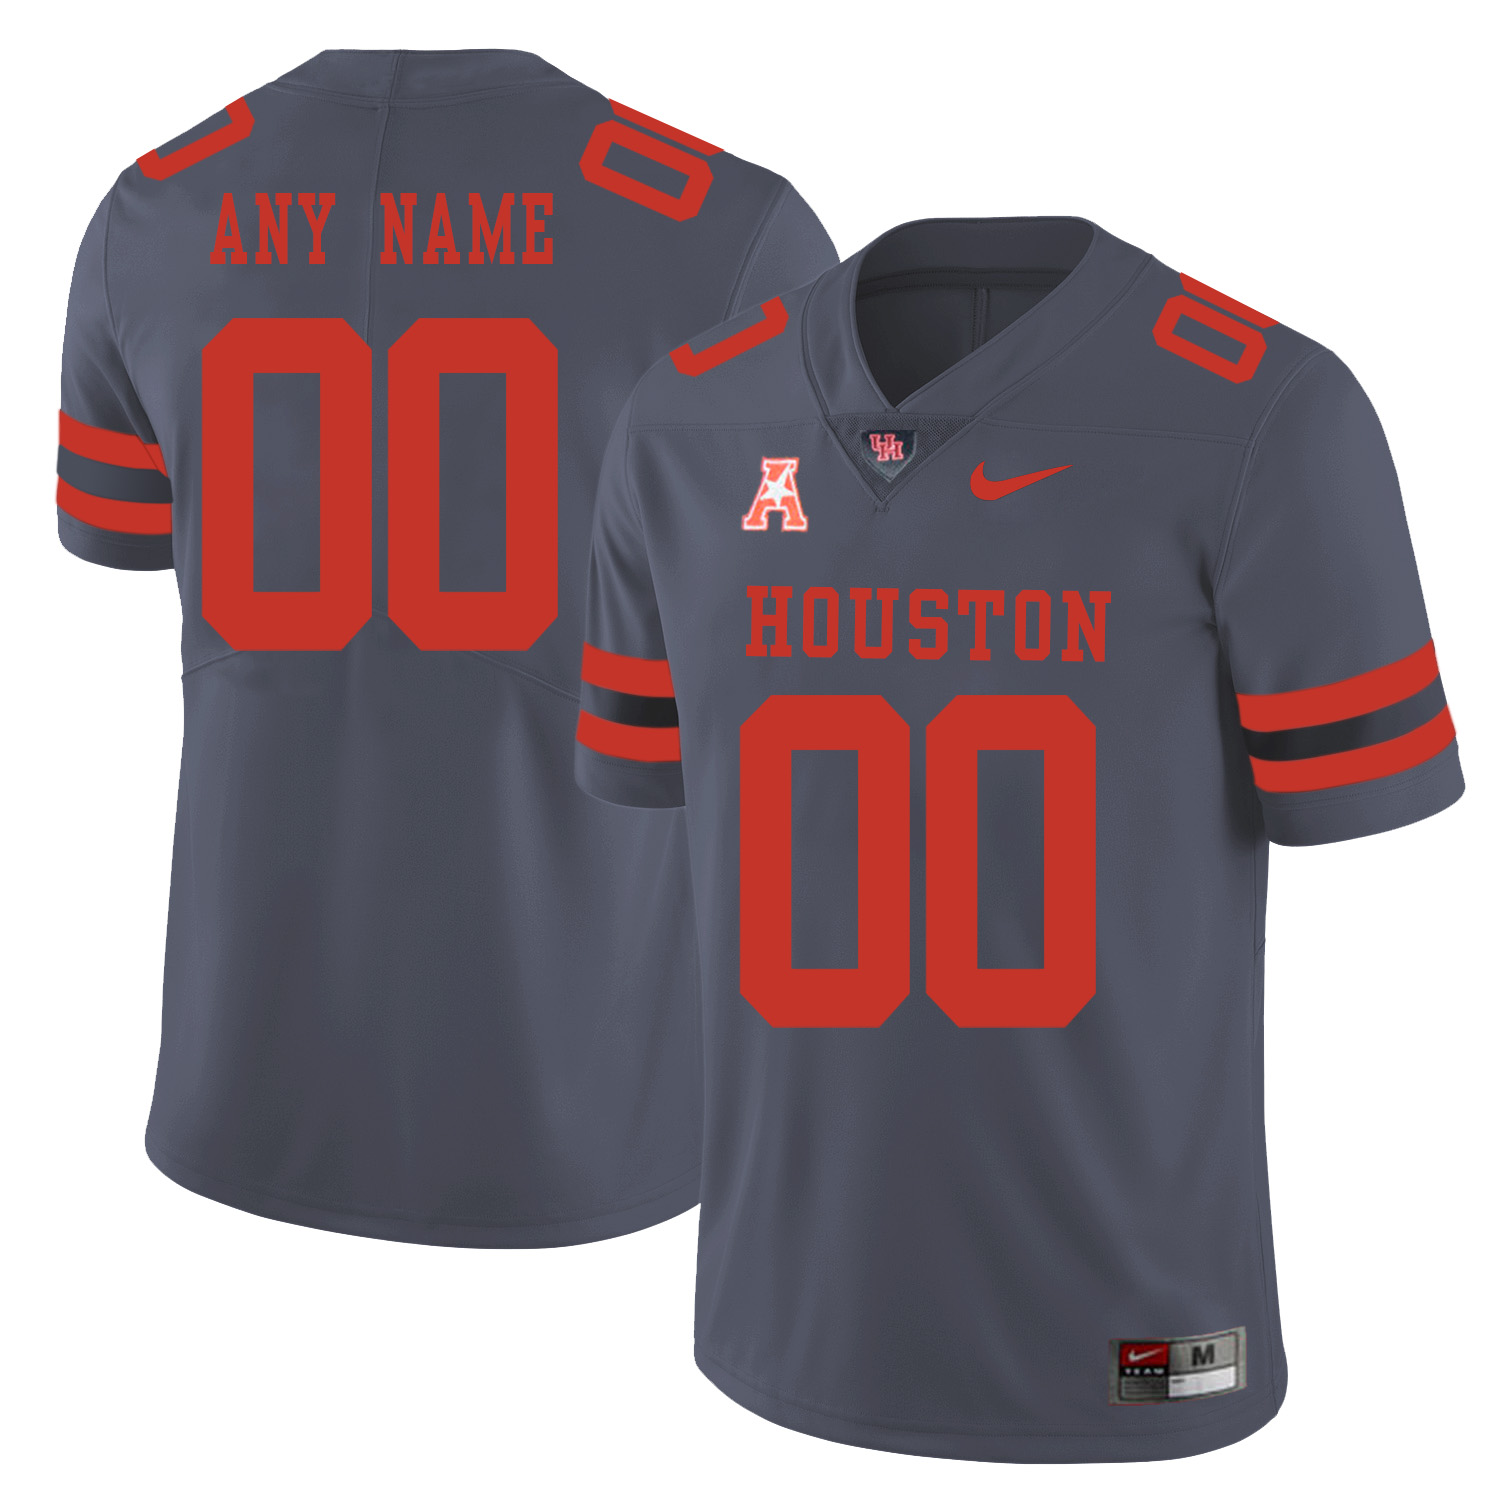 Mens Youth Houston Cougars Custom 2021 Grey Nike College Football Jersey